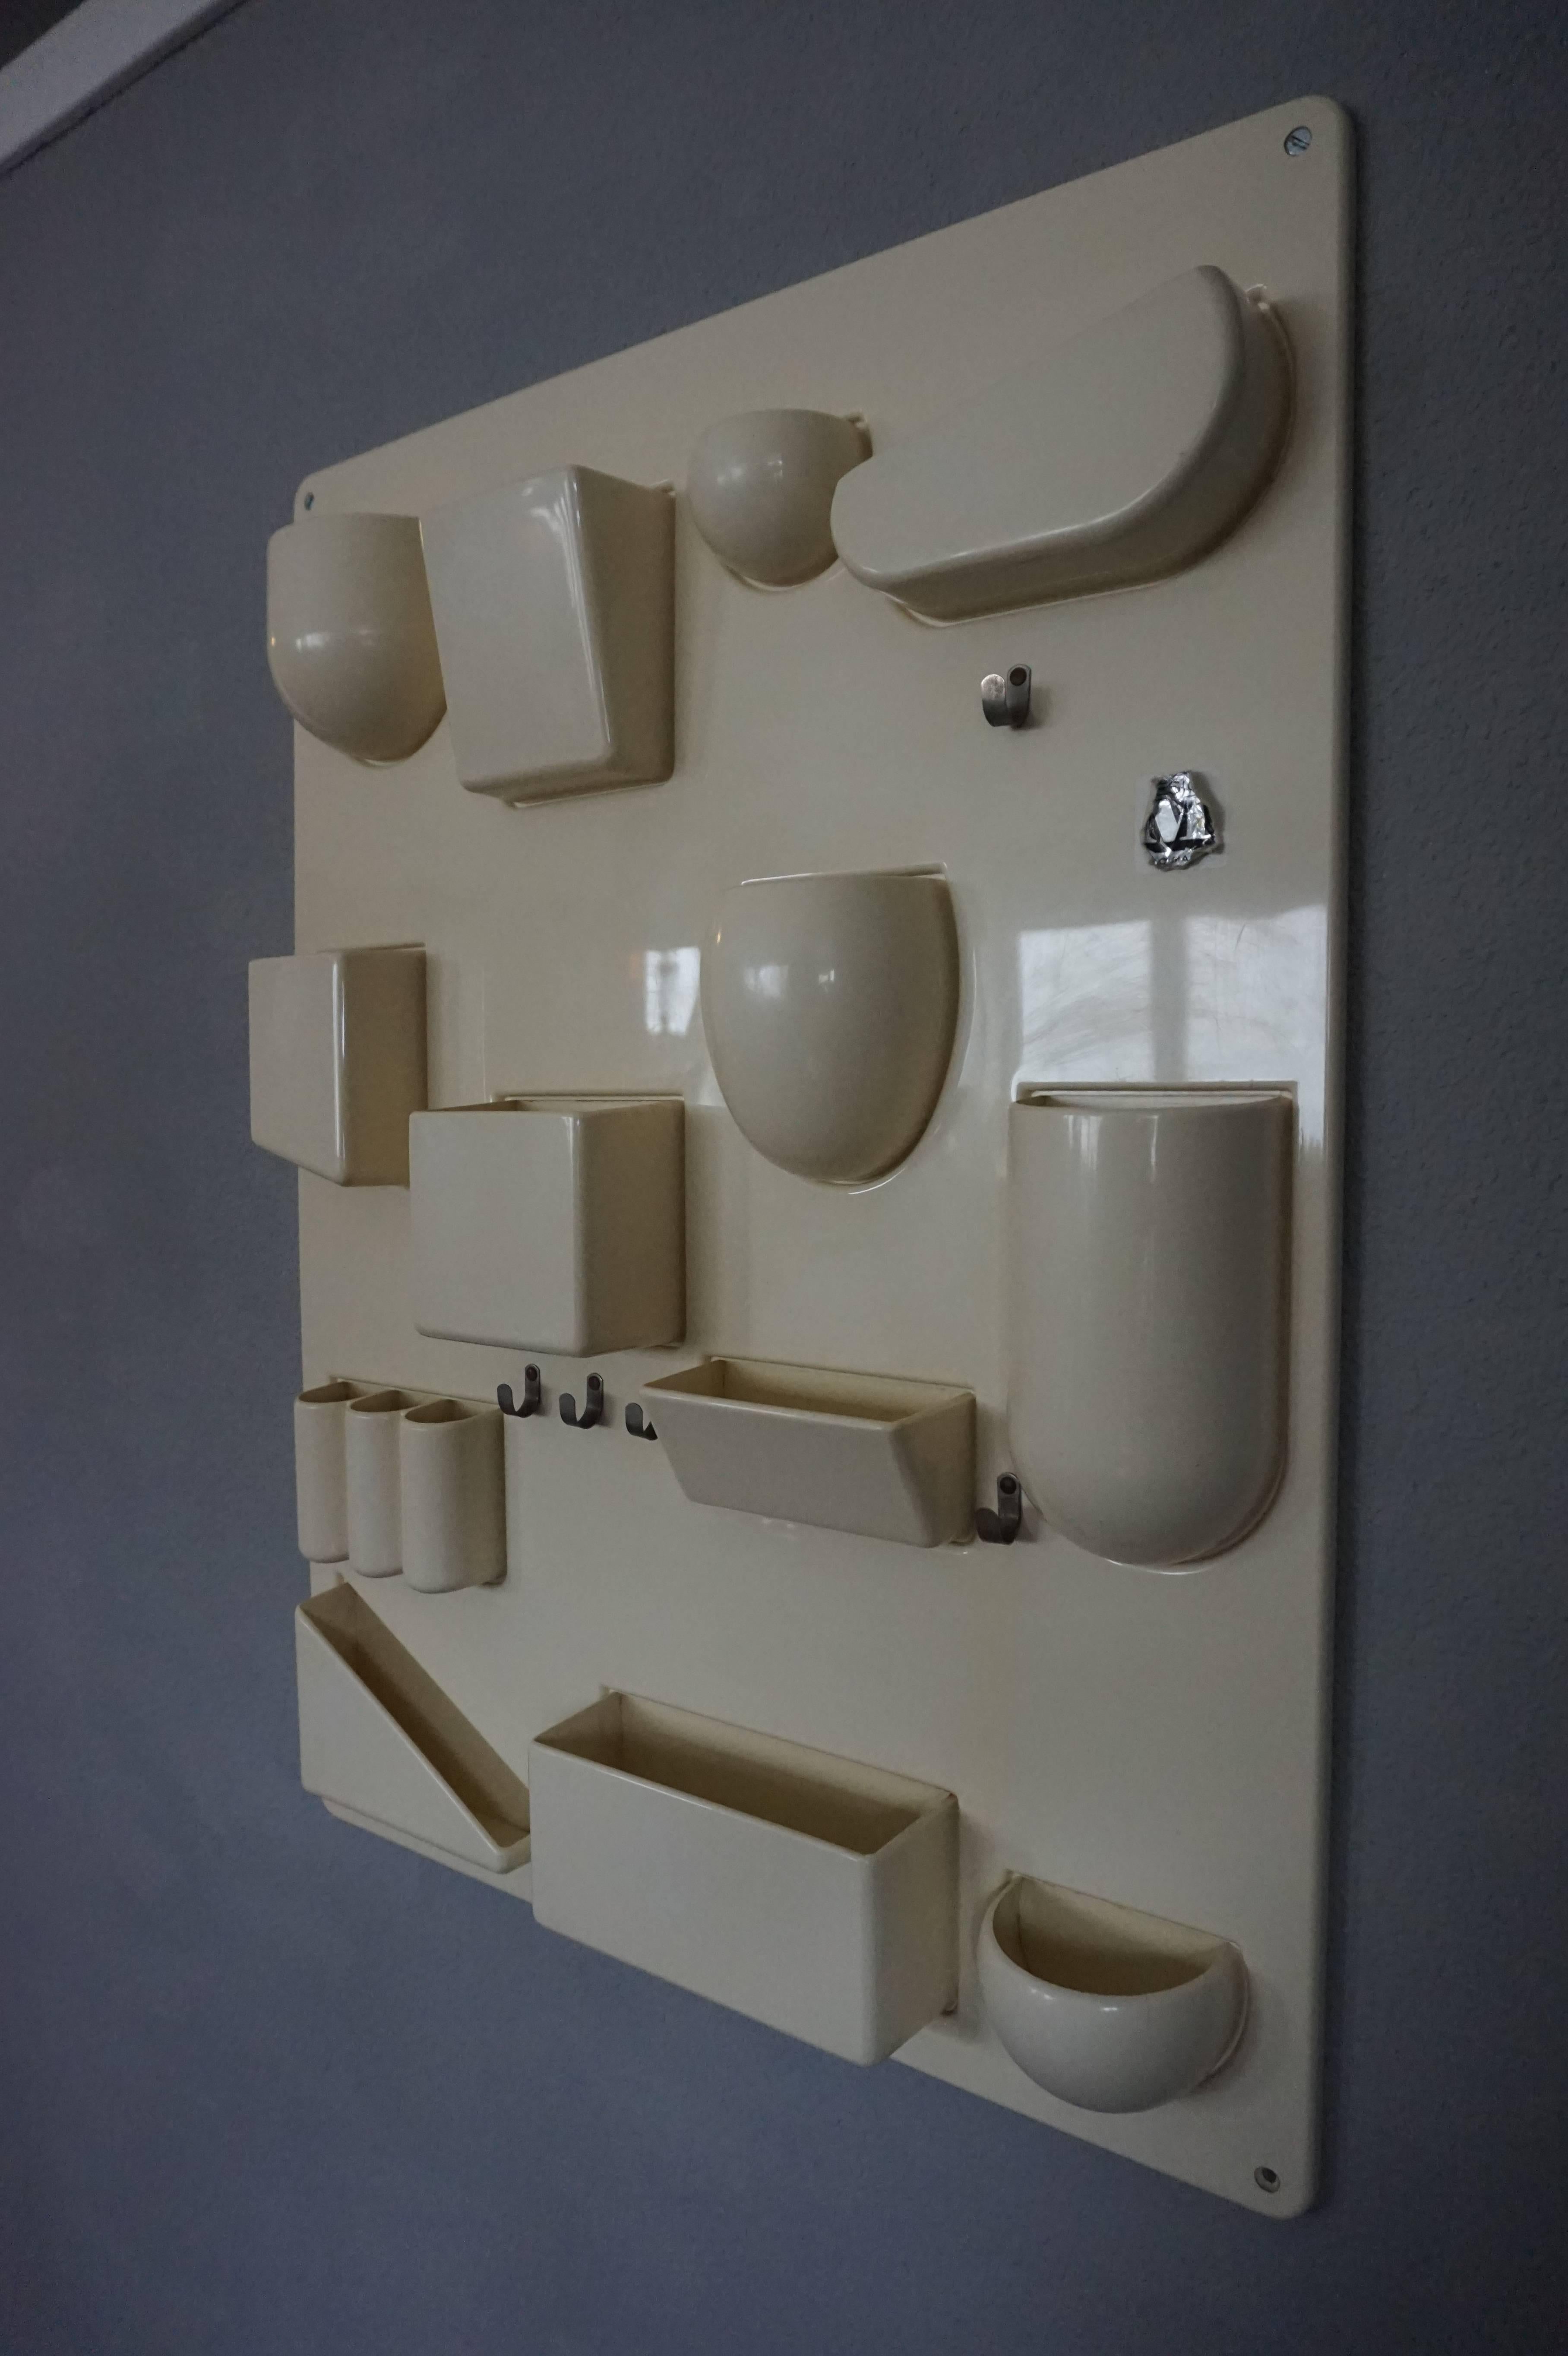 Here's another collectible at a great price.

This molded plastic, vintage design wall organizer by Ingo Maurer needs no further introduction. This design by Dorothee Becker is a joy to look at and very practical to use. It will look great on the